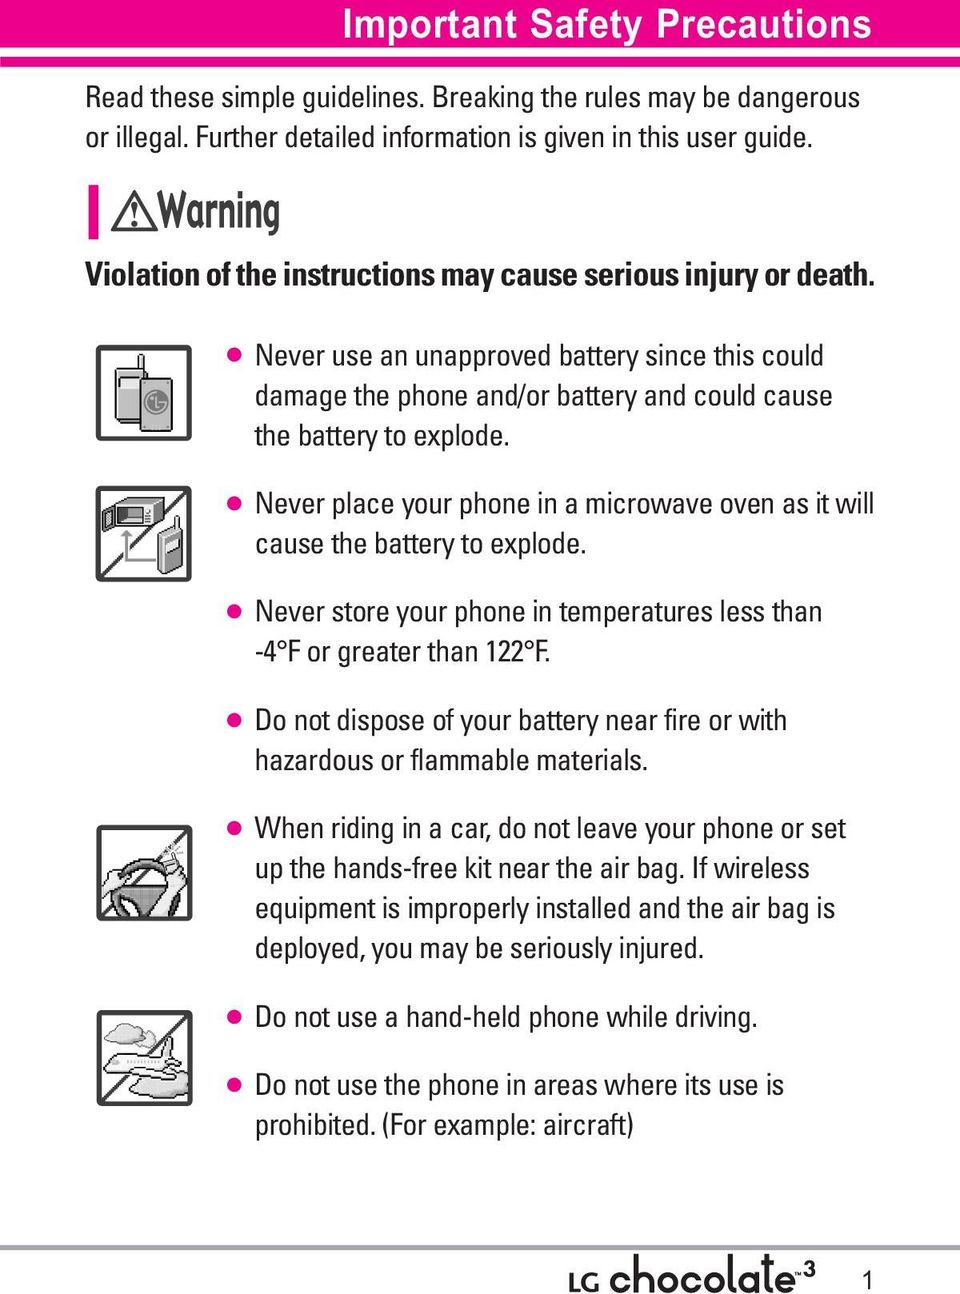 Never place your phone in a microwave oven as it will cause the battery to explode. Never store your phone in temperatures less than -4 F or greater than 122 F.